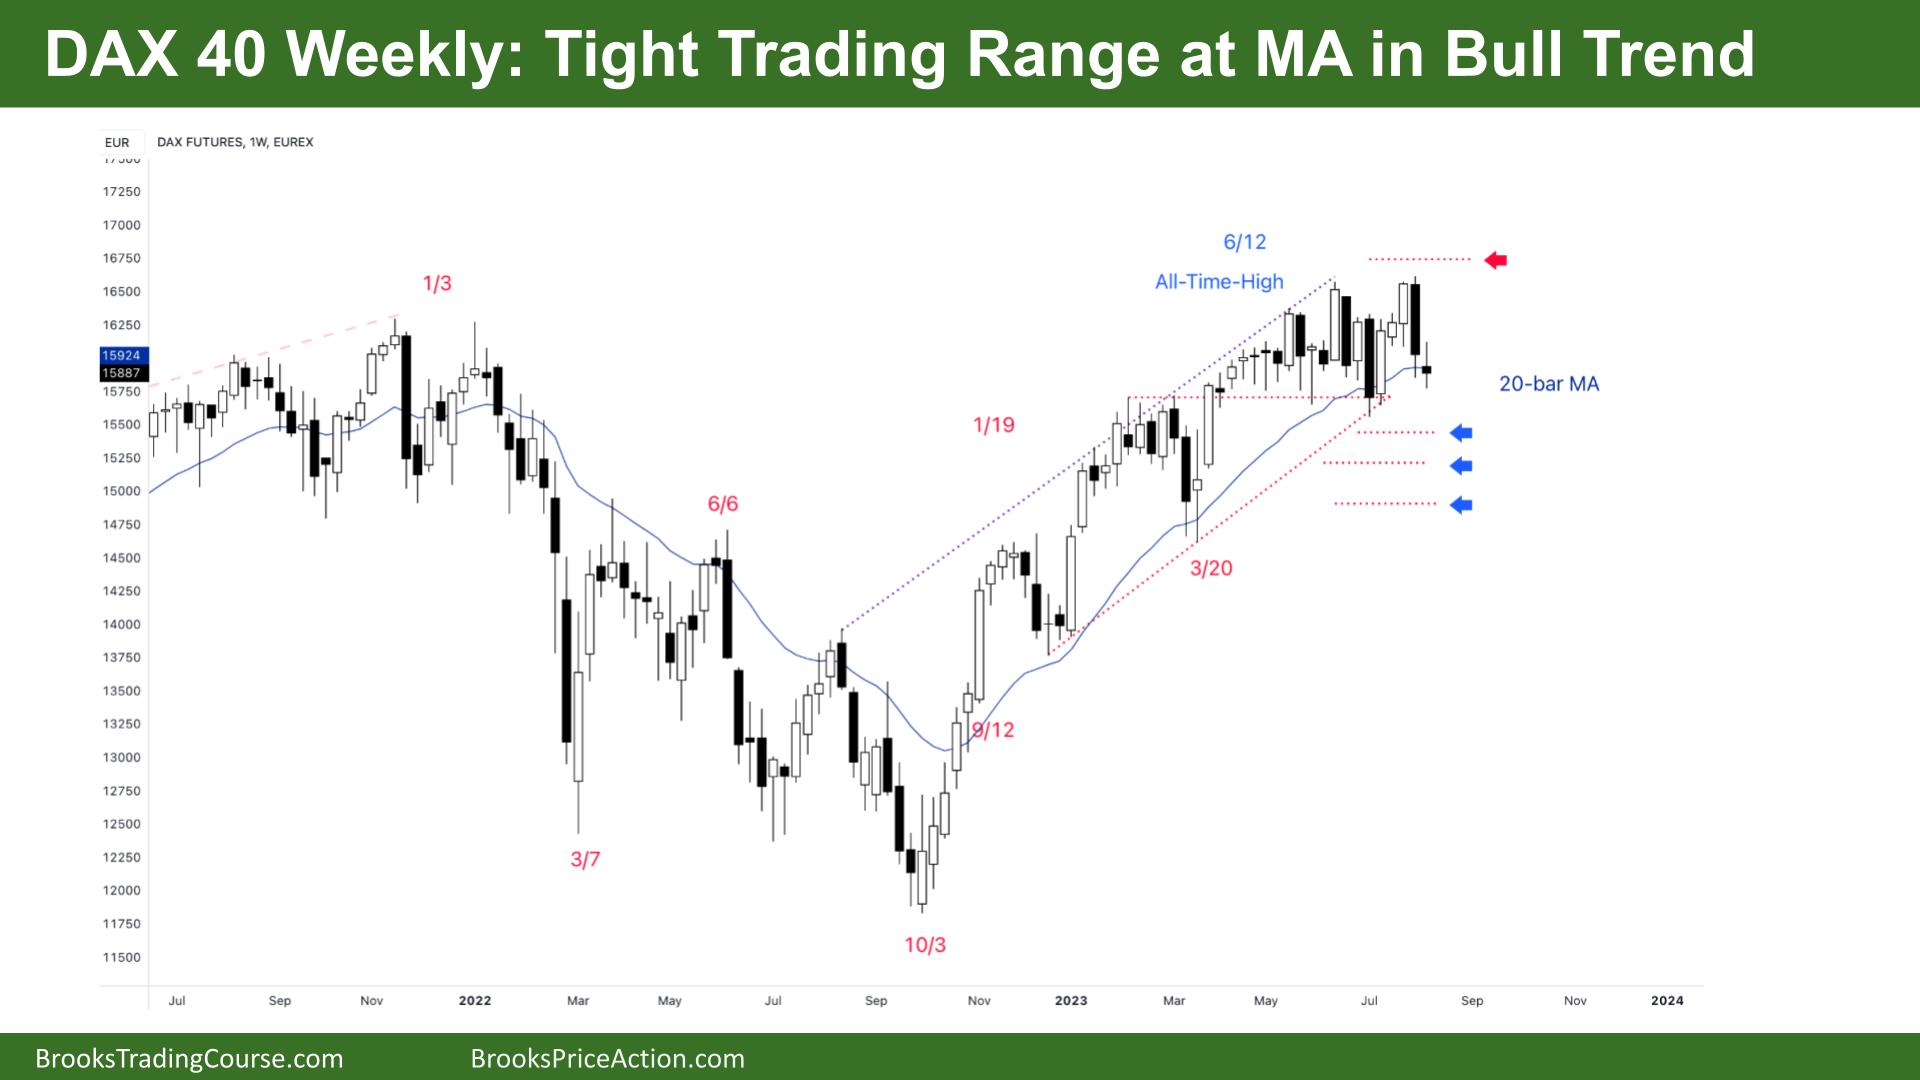 DAX 40 Tight Trading Range at MA in Bull Trend